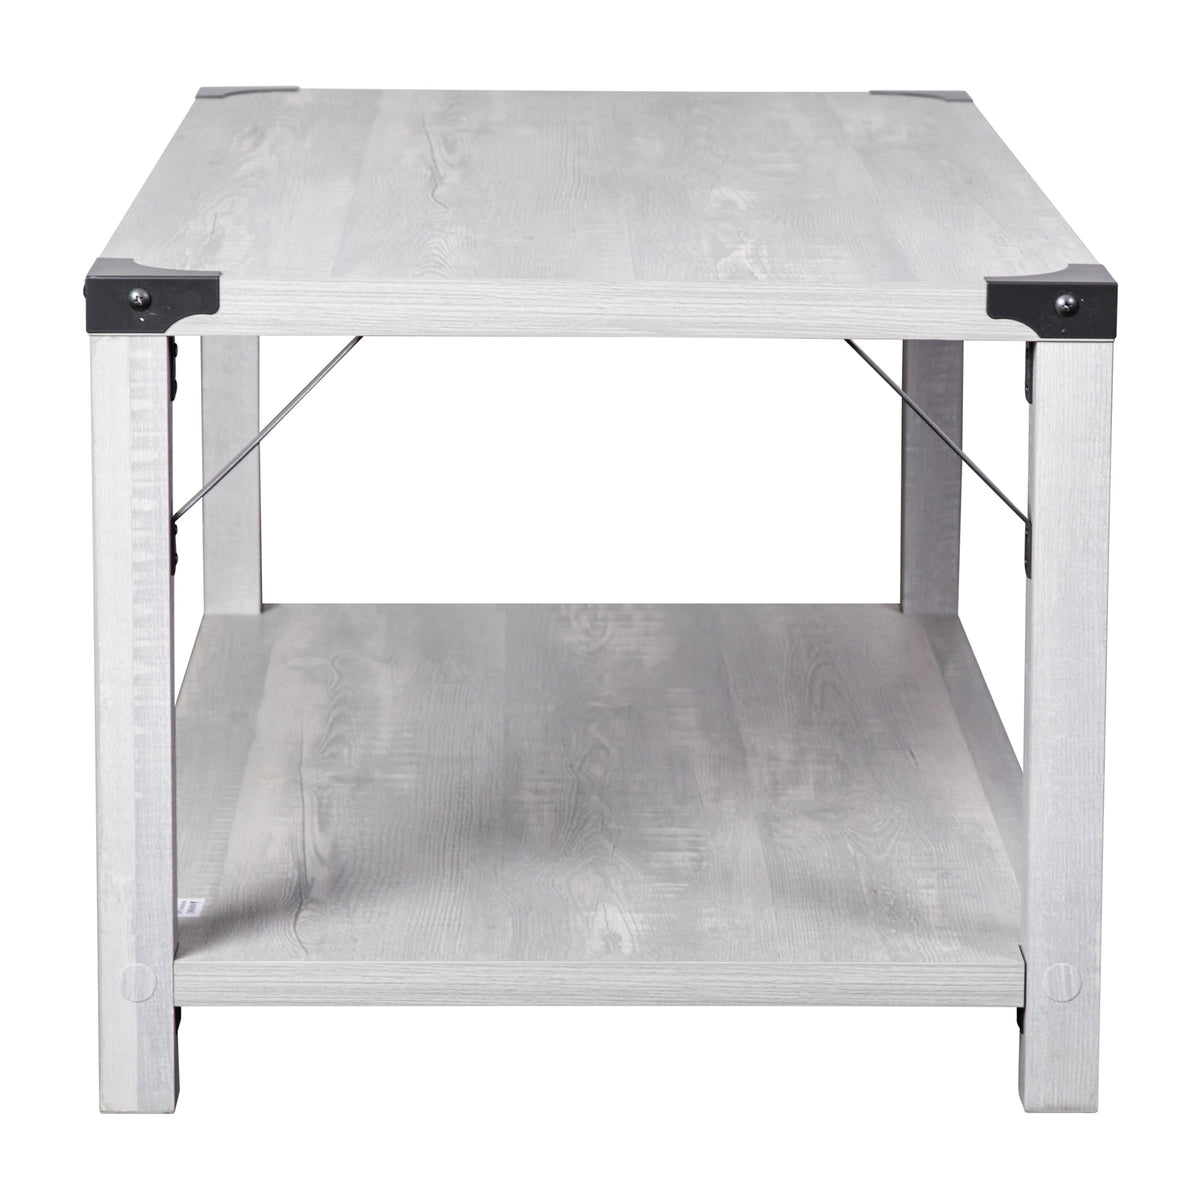 Aspen Gray |#| 2-Tier Coffee Table with Black Metal Side Braces and Corner Caps - Aspen Gray